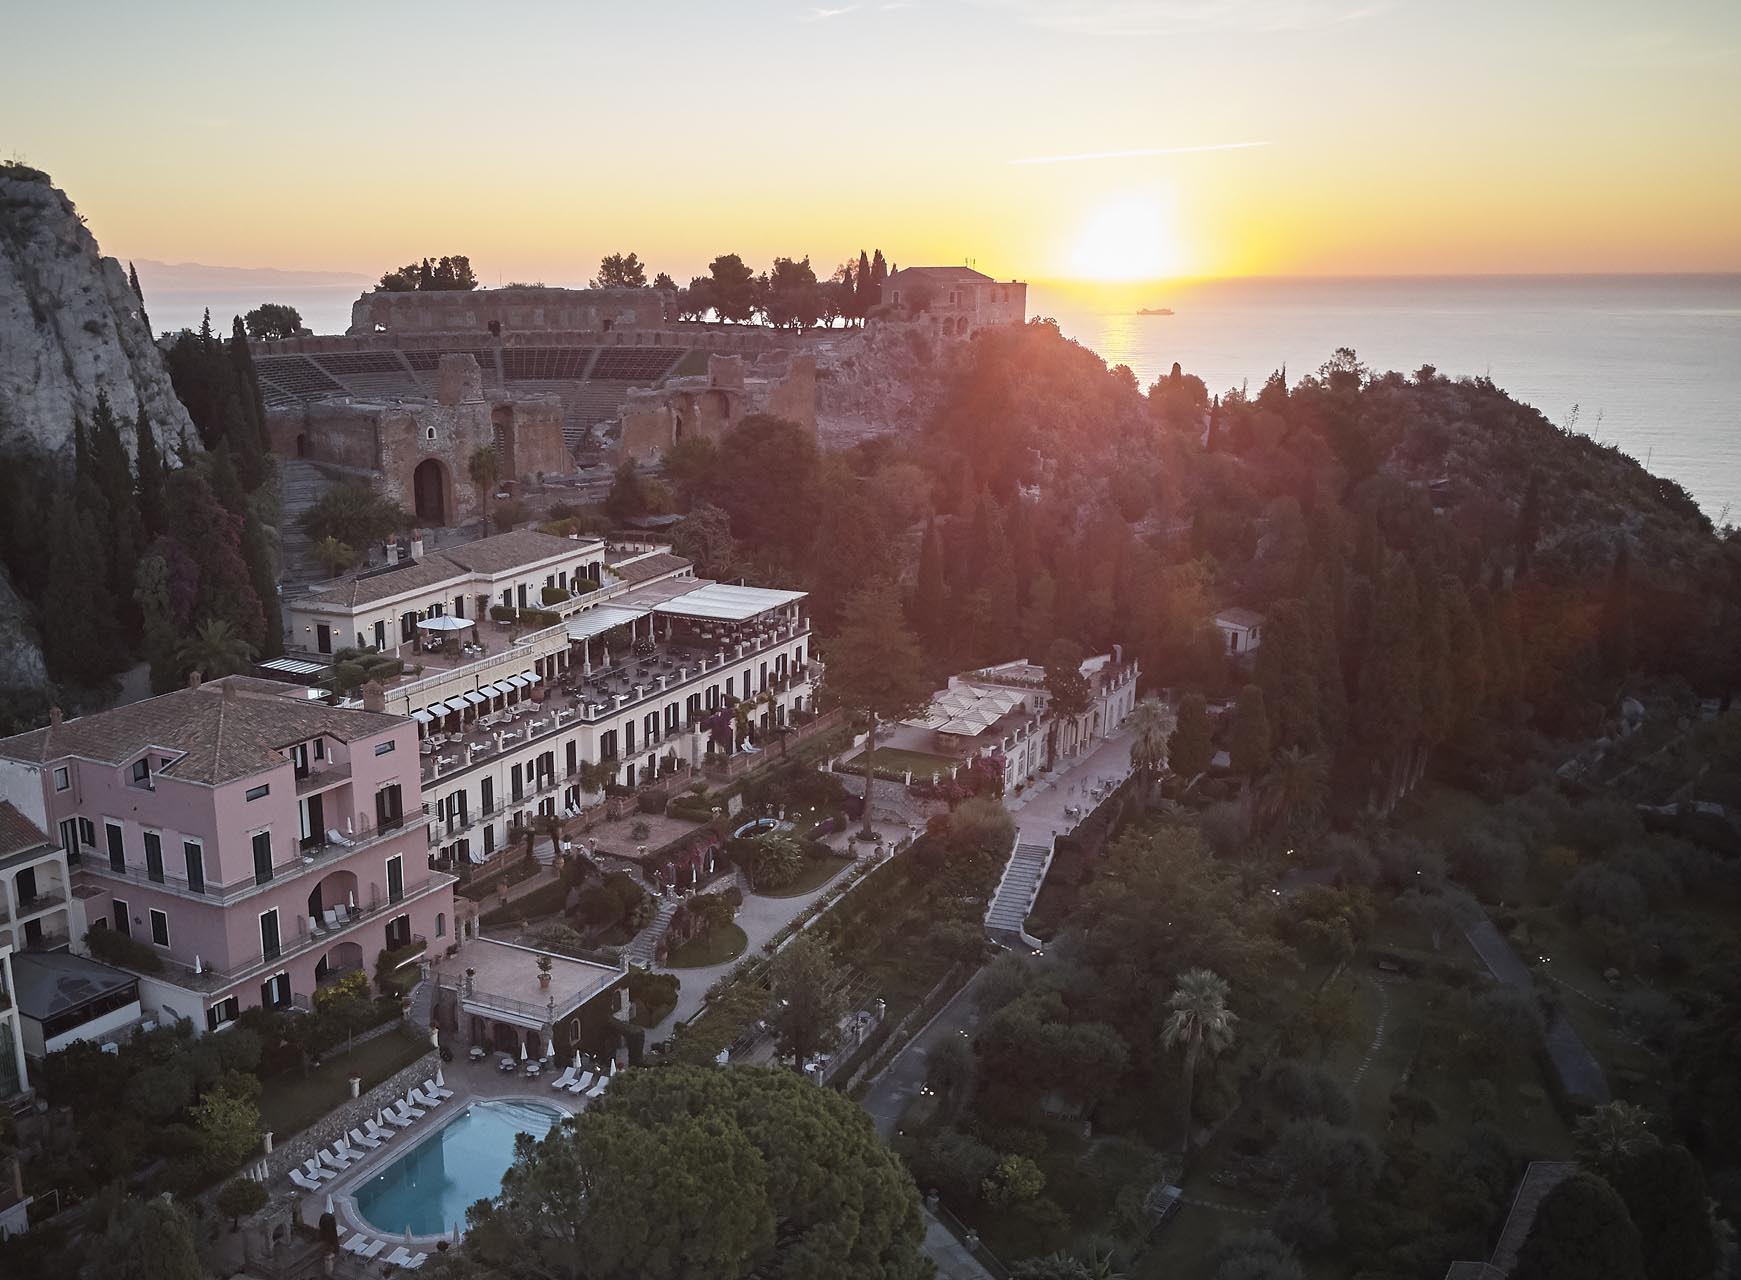 A stunning sunset at the Belmond Grand Hotel Timeo in Taormina. Looking out over the Sicilian east coast, the building is located near the Greek Theatre.